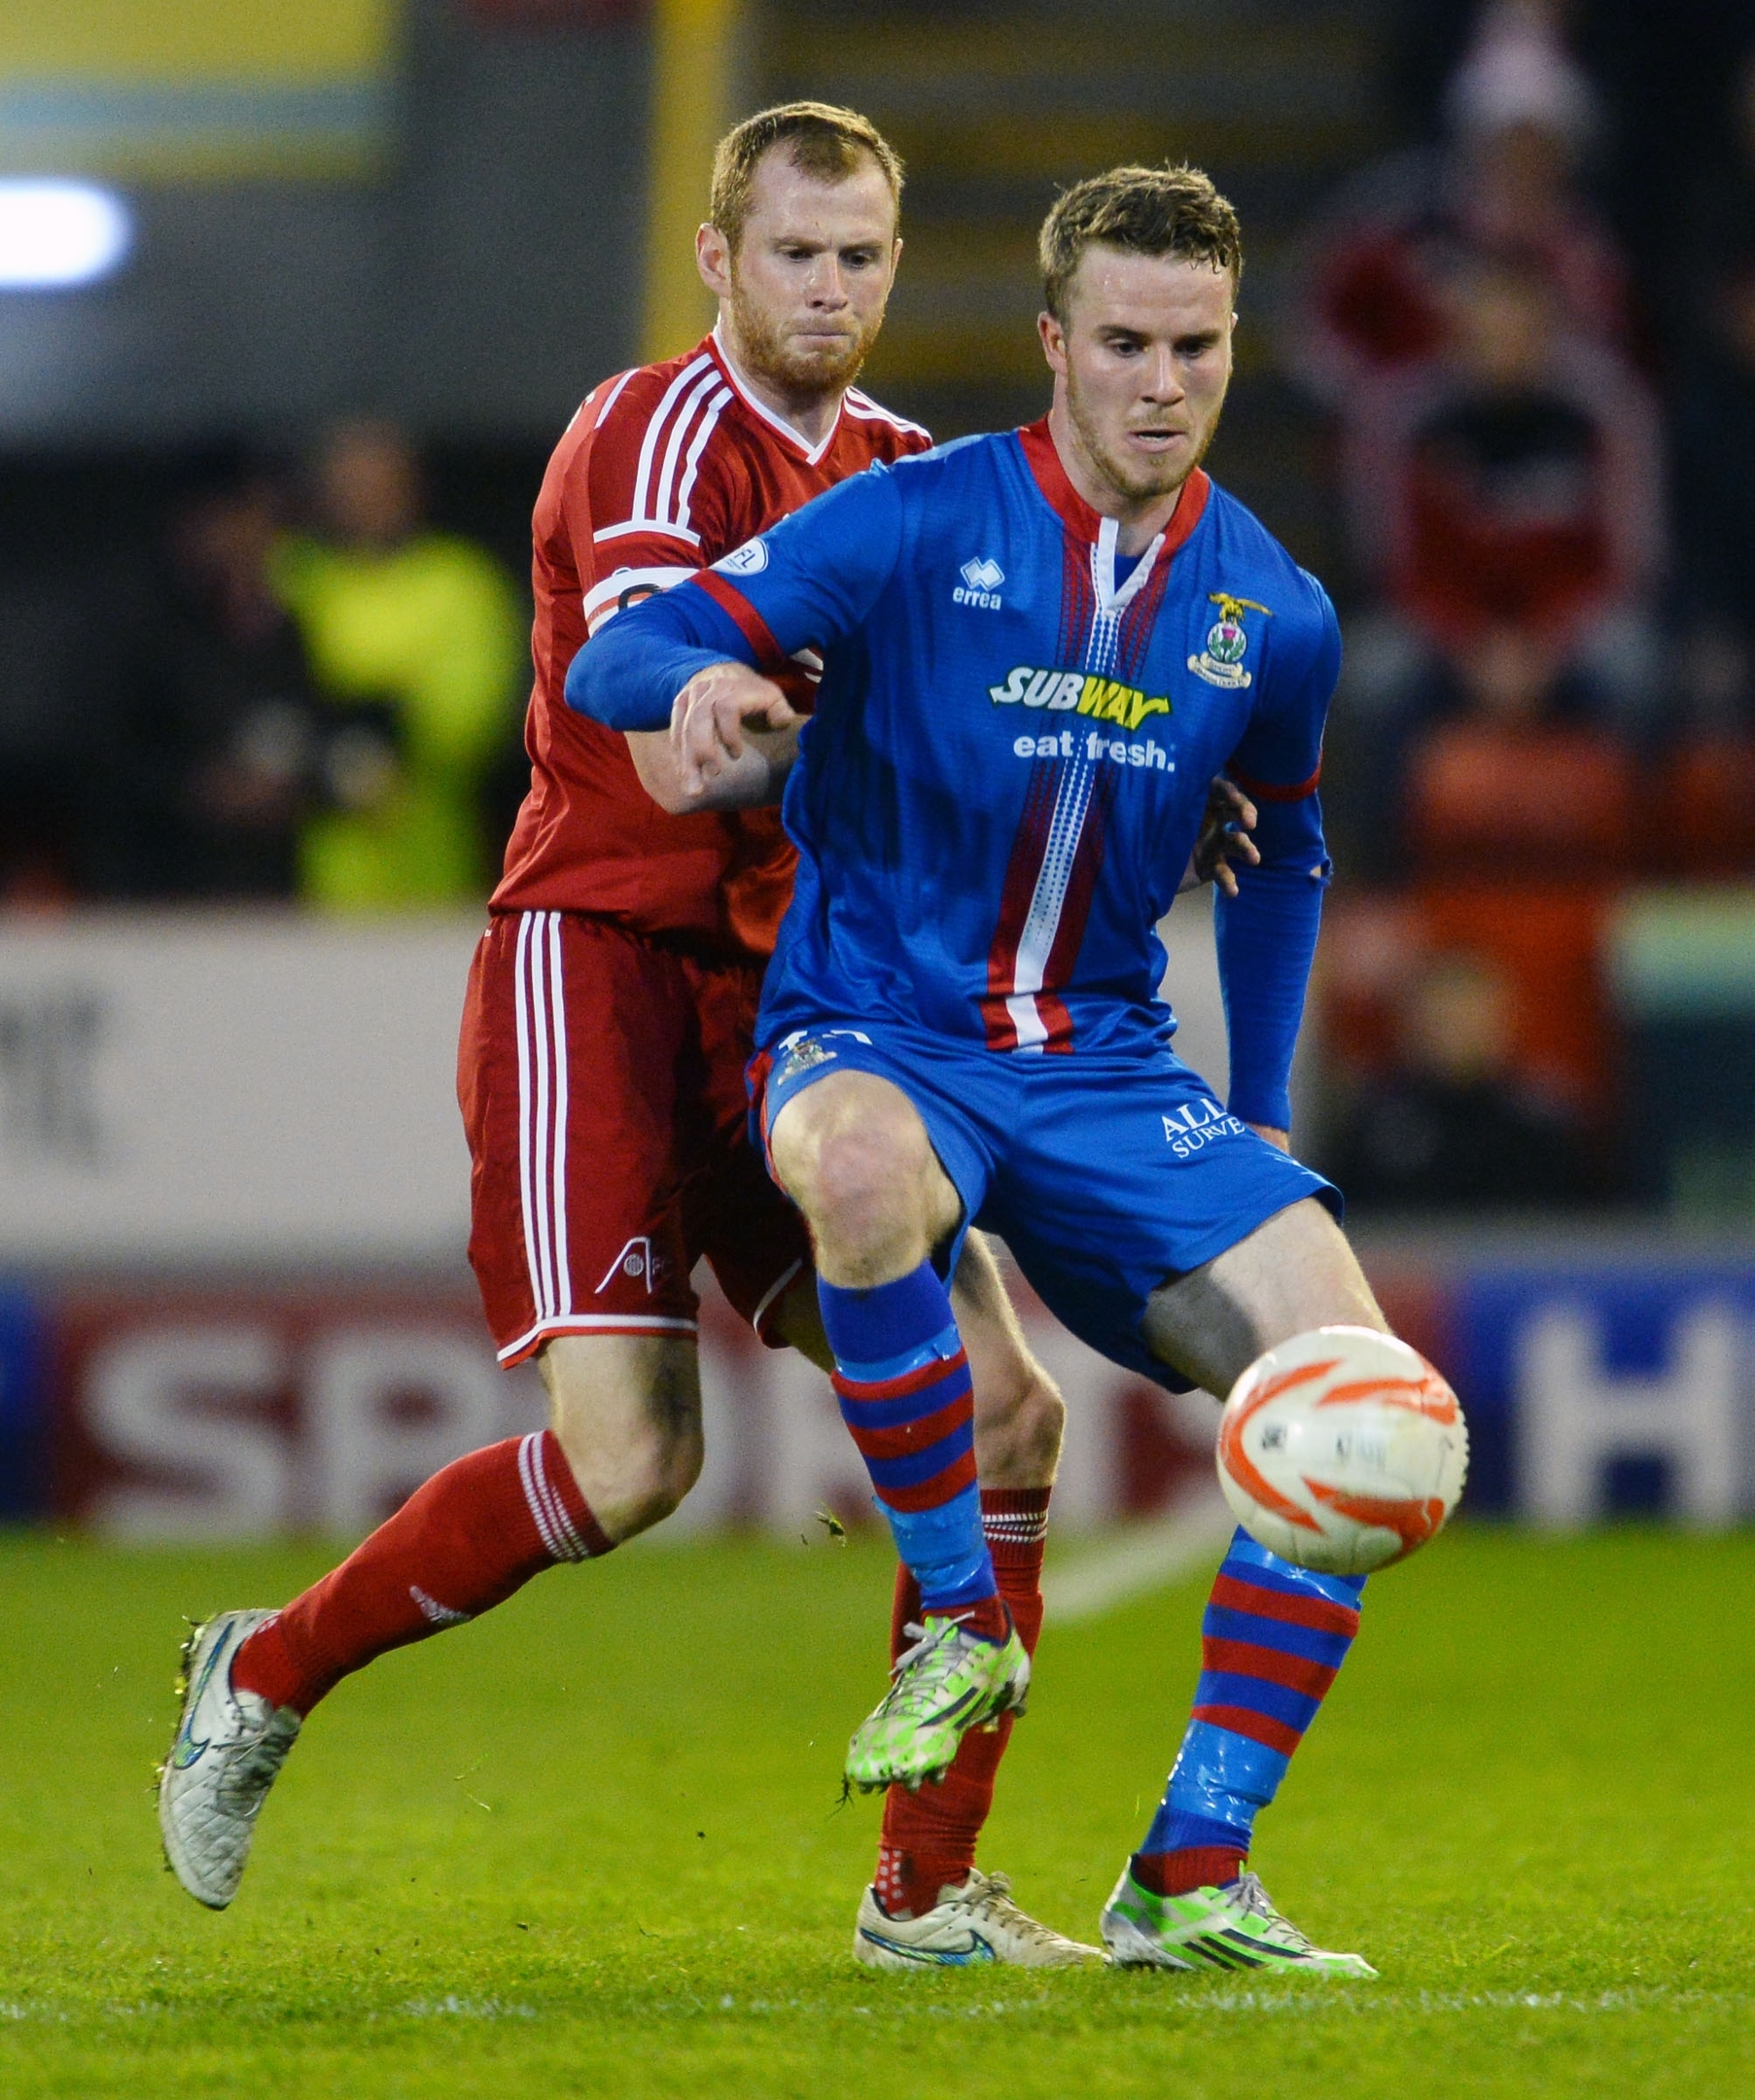 Mark Reynolds and Marley Watkins battle for the ball